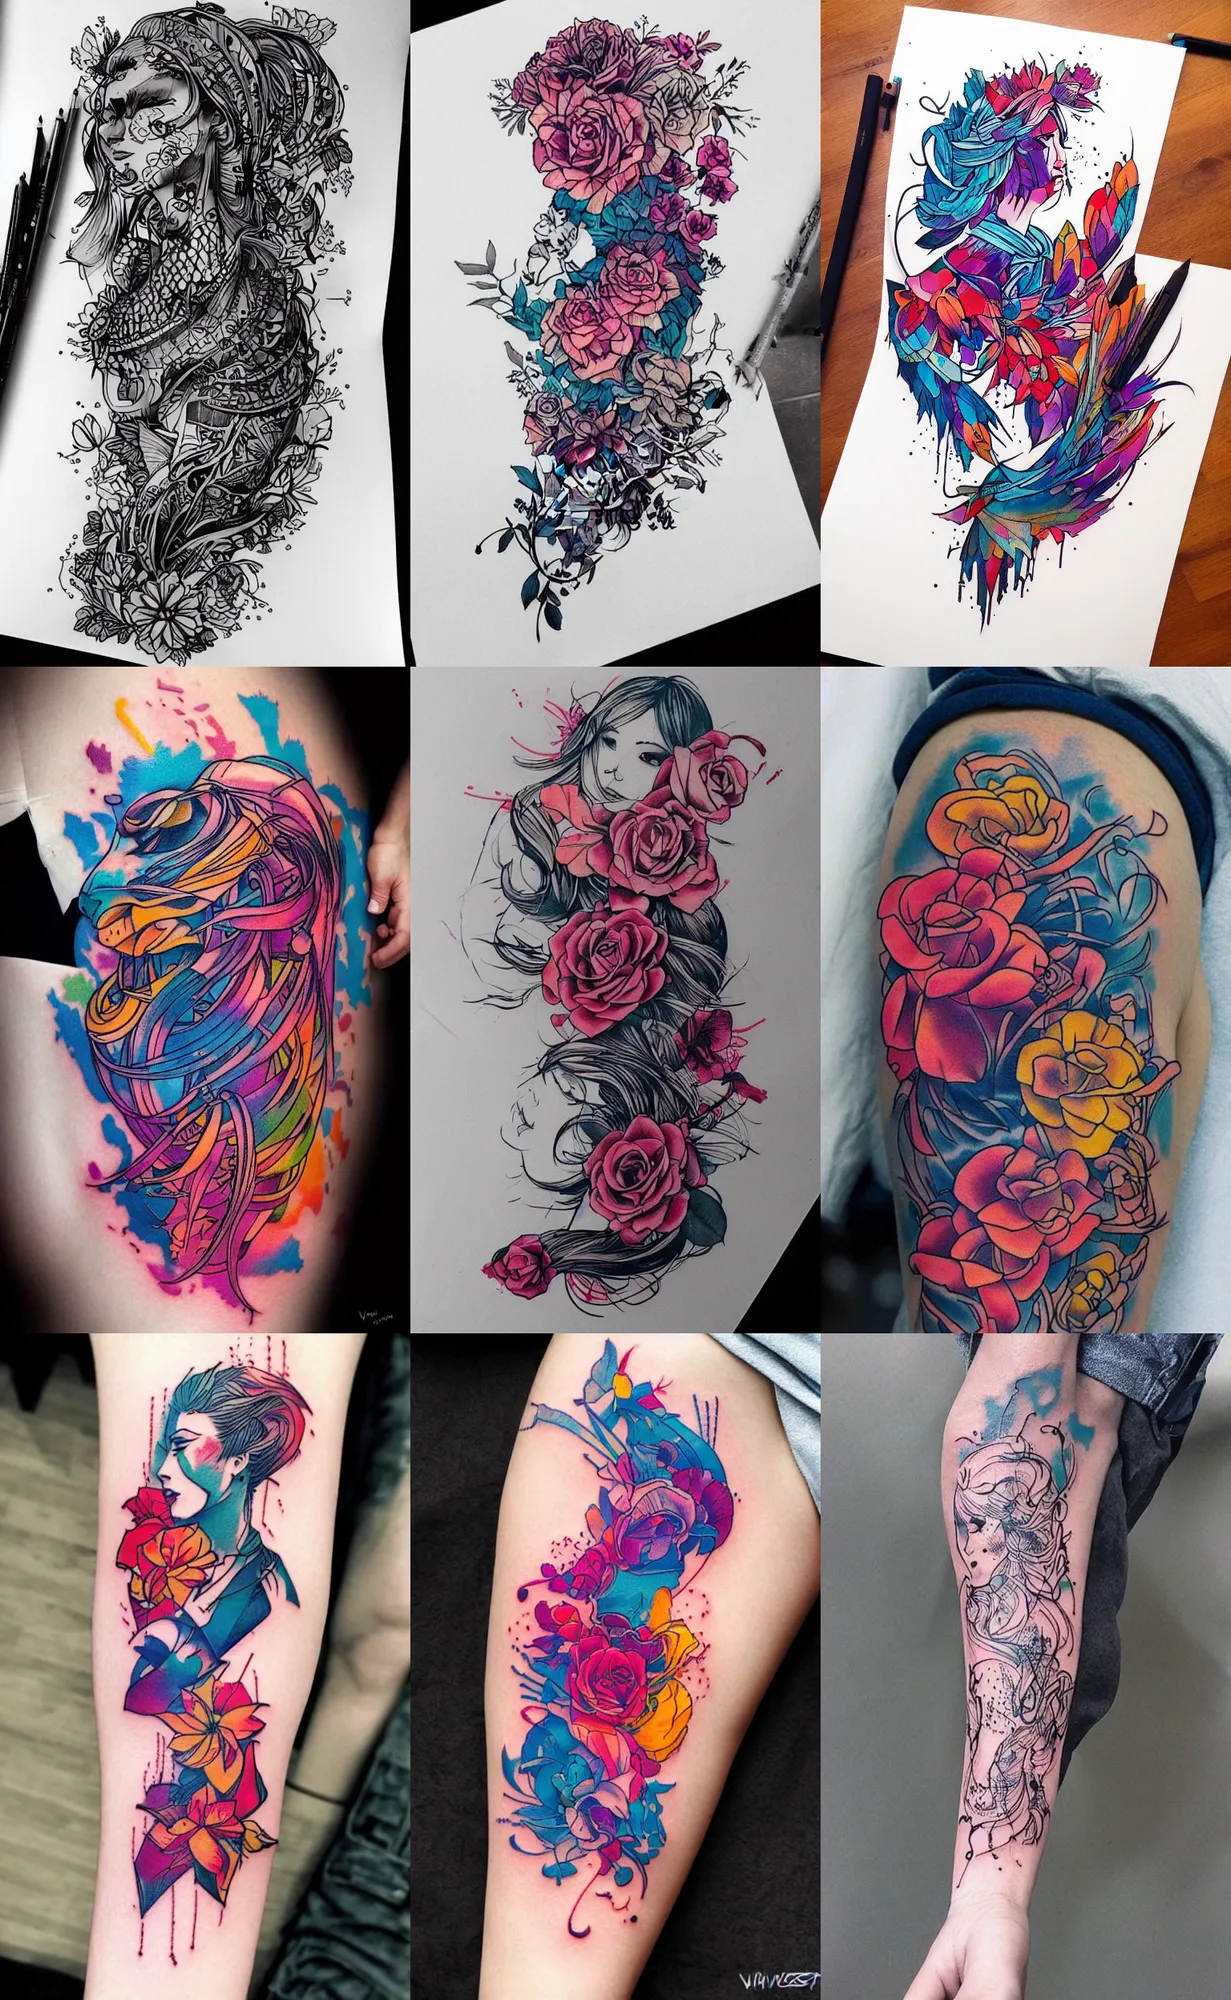 How much does an average-sized, full colour tattoo typically cost? - Quora